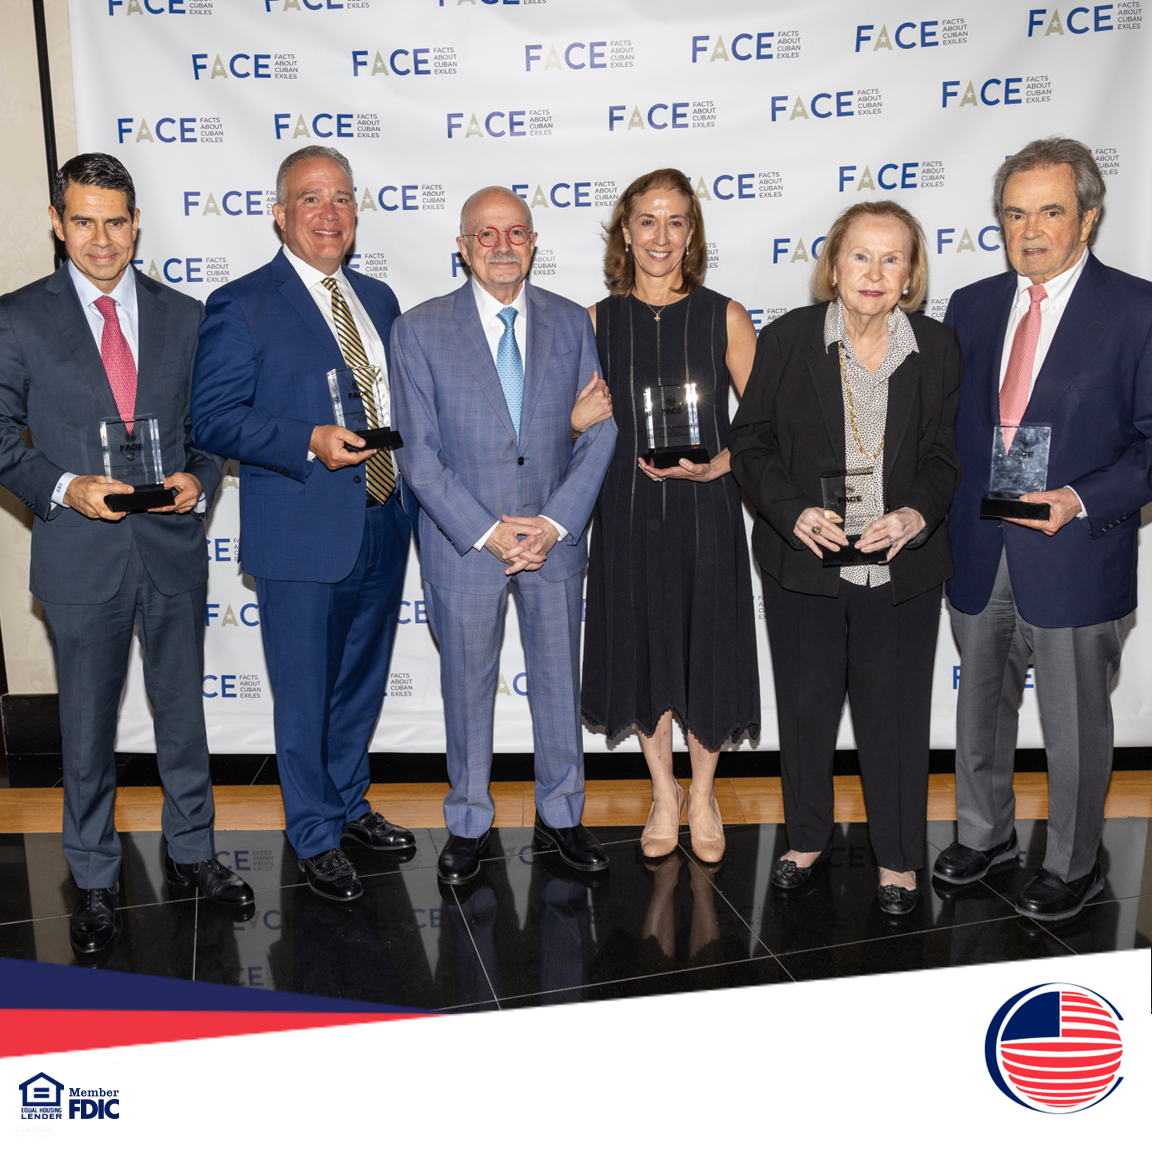 President and CEO of US Century Bank, Luis de la Aguilera alongside other professionals holding their awards at the FACE Awards.